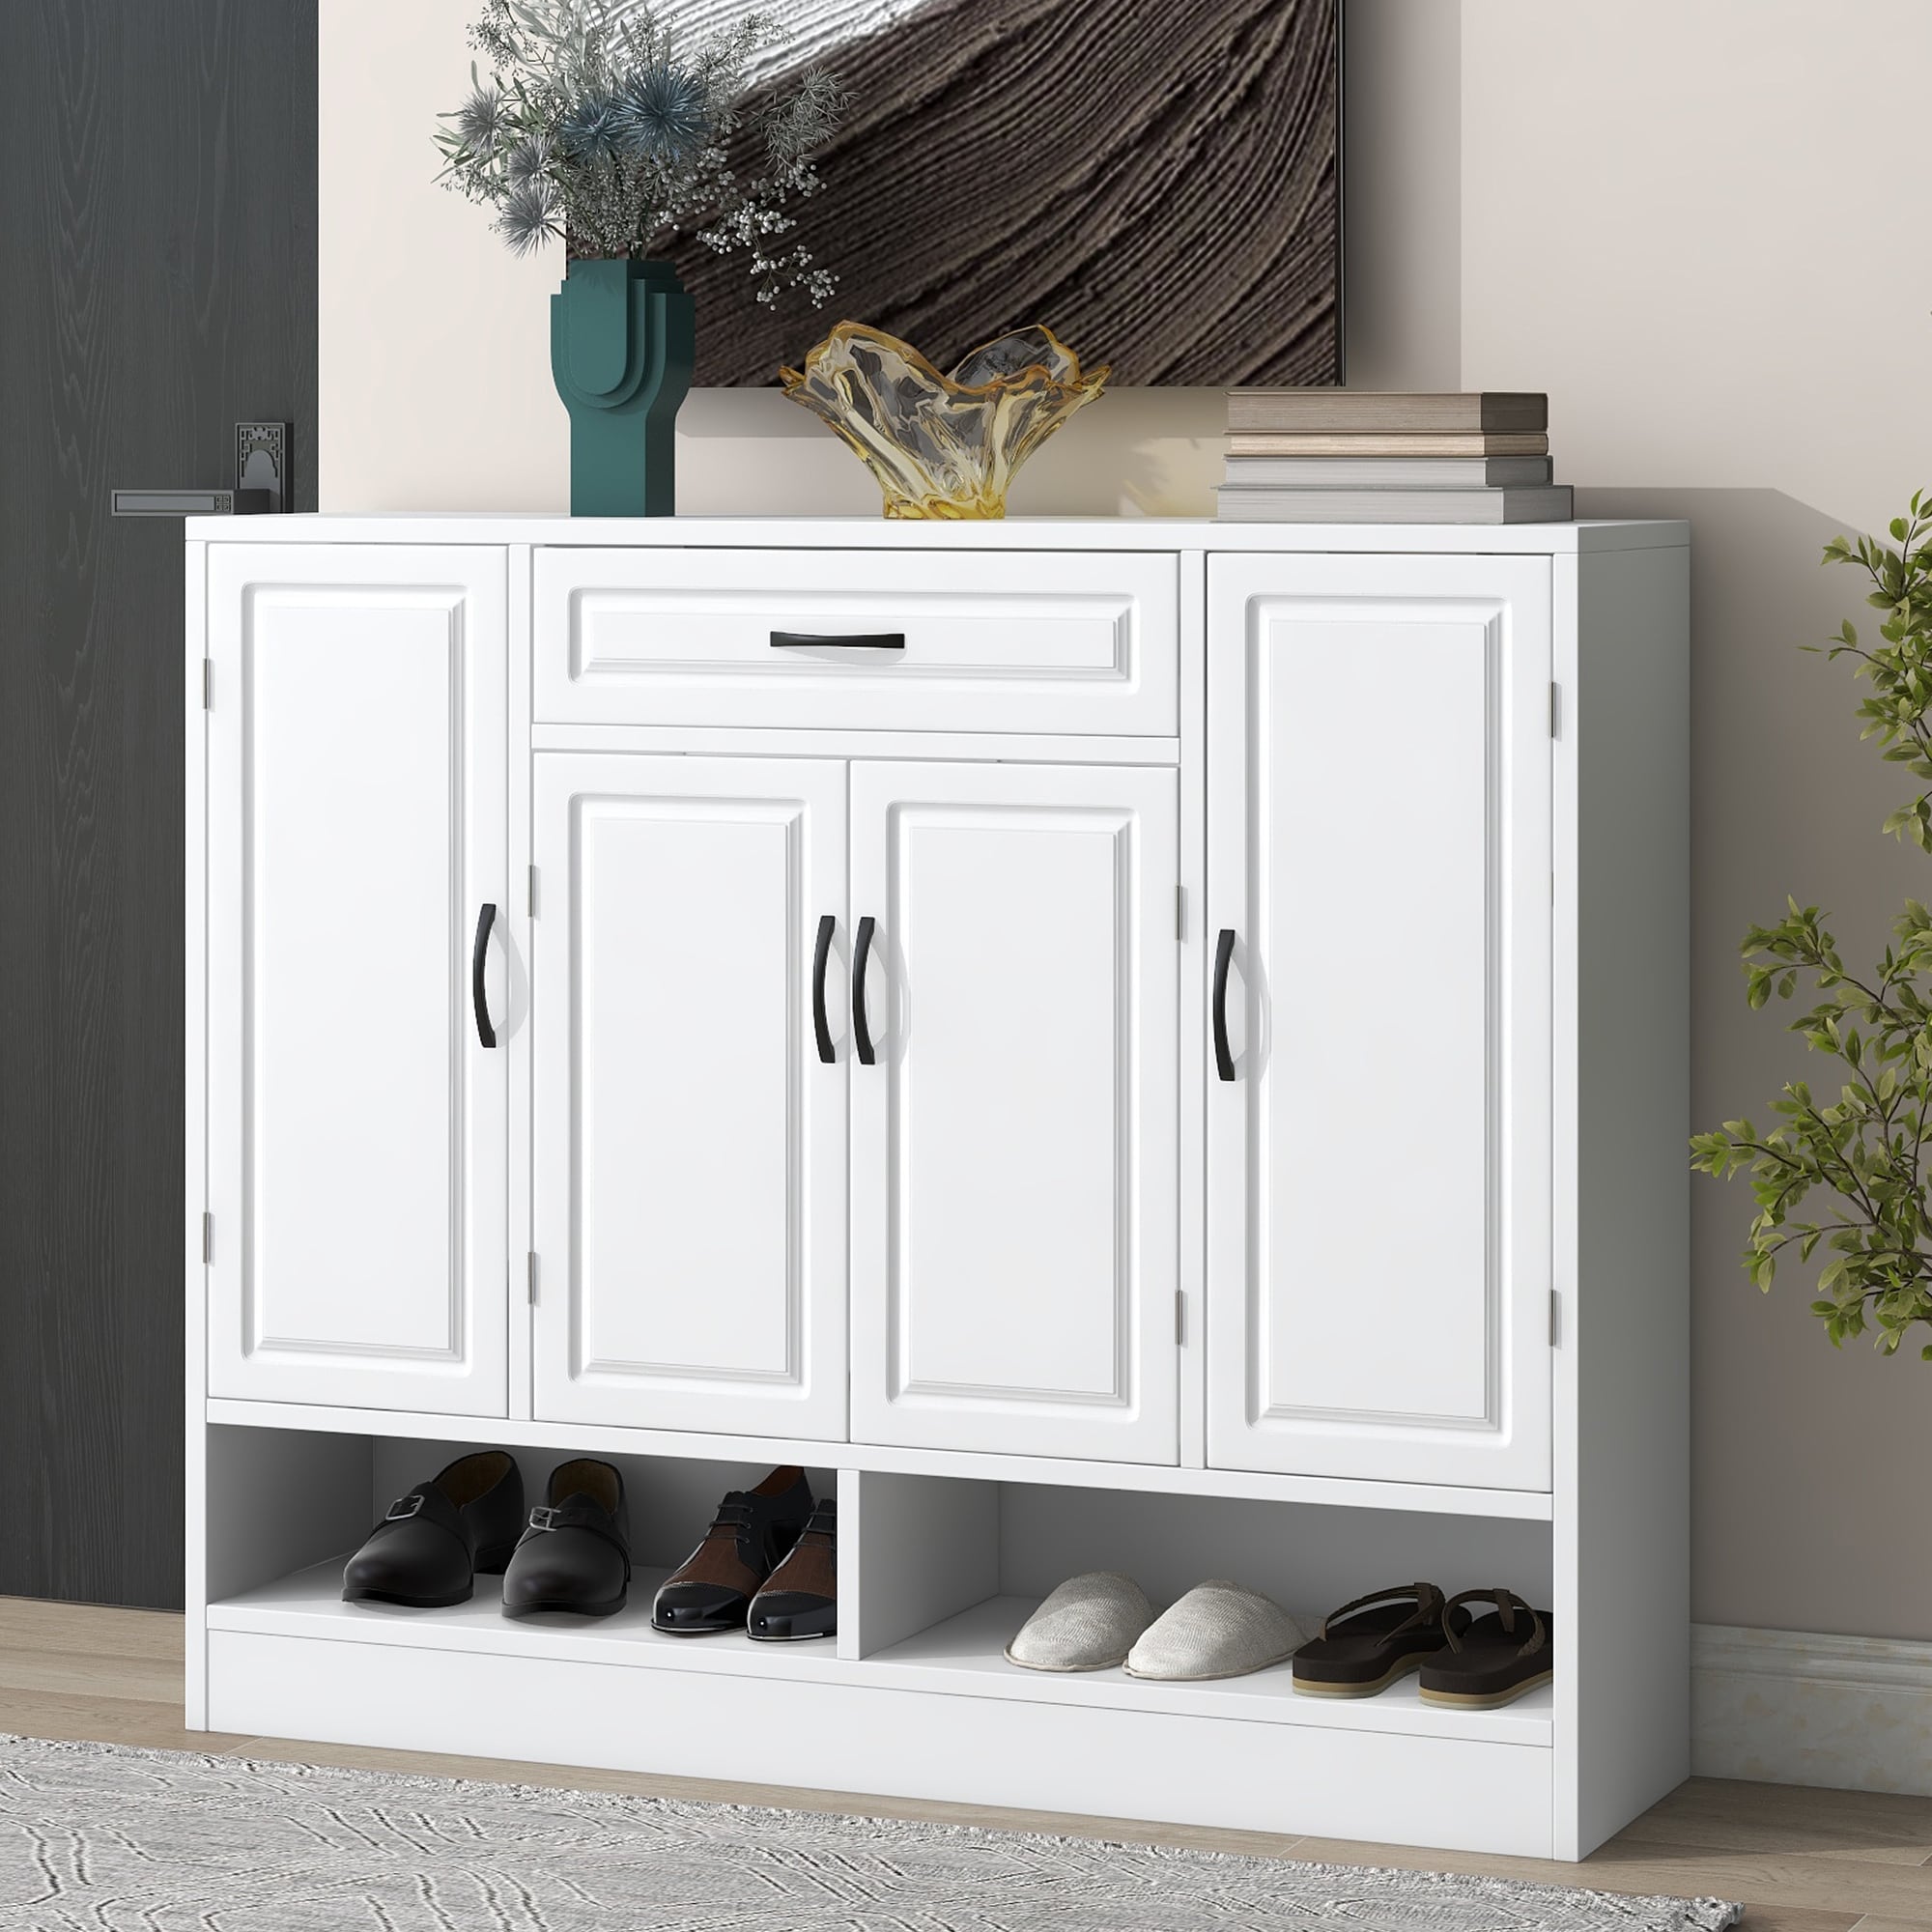 https://ak1.ostkcdn.com/images/products/is/images/direct/623d2bae89703f59128a6f648710f2ff96937e2a/Shoe-Cabinet-for-Entryway%2C-Modern-Free-Standing-Shoe-Storage-Cabinets%2C-Shoe-Organizer-Cabinet-with-Adjustable-Shelves.jpg